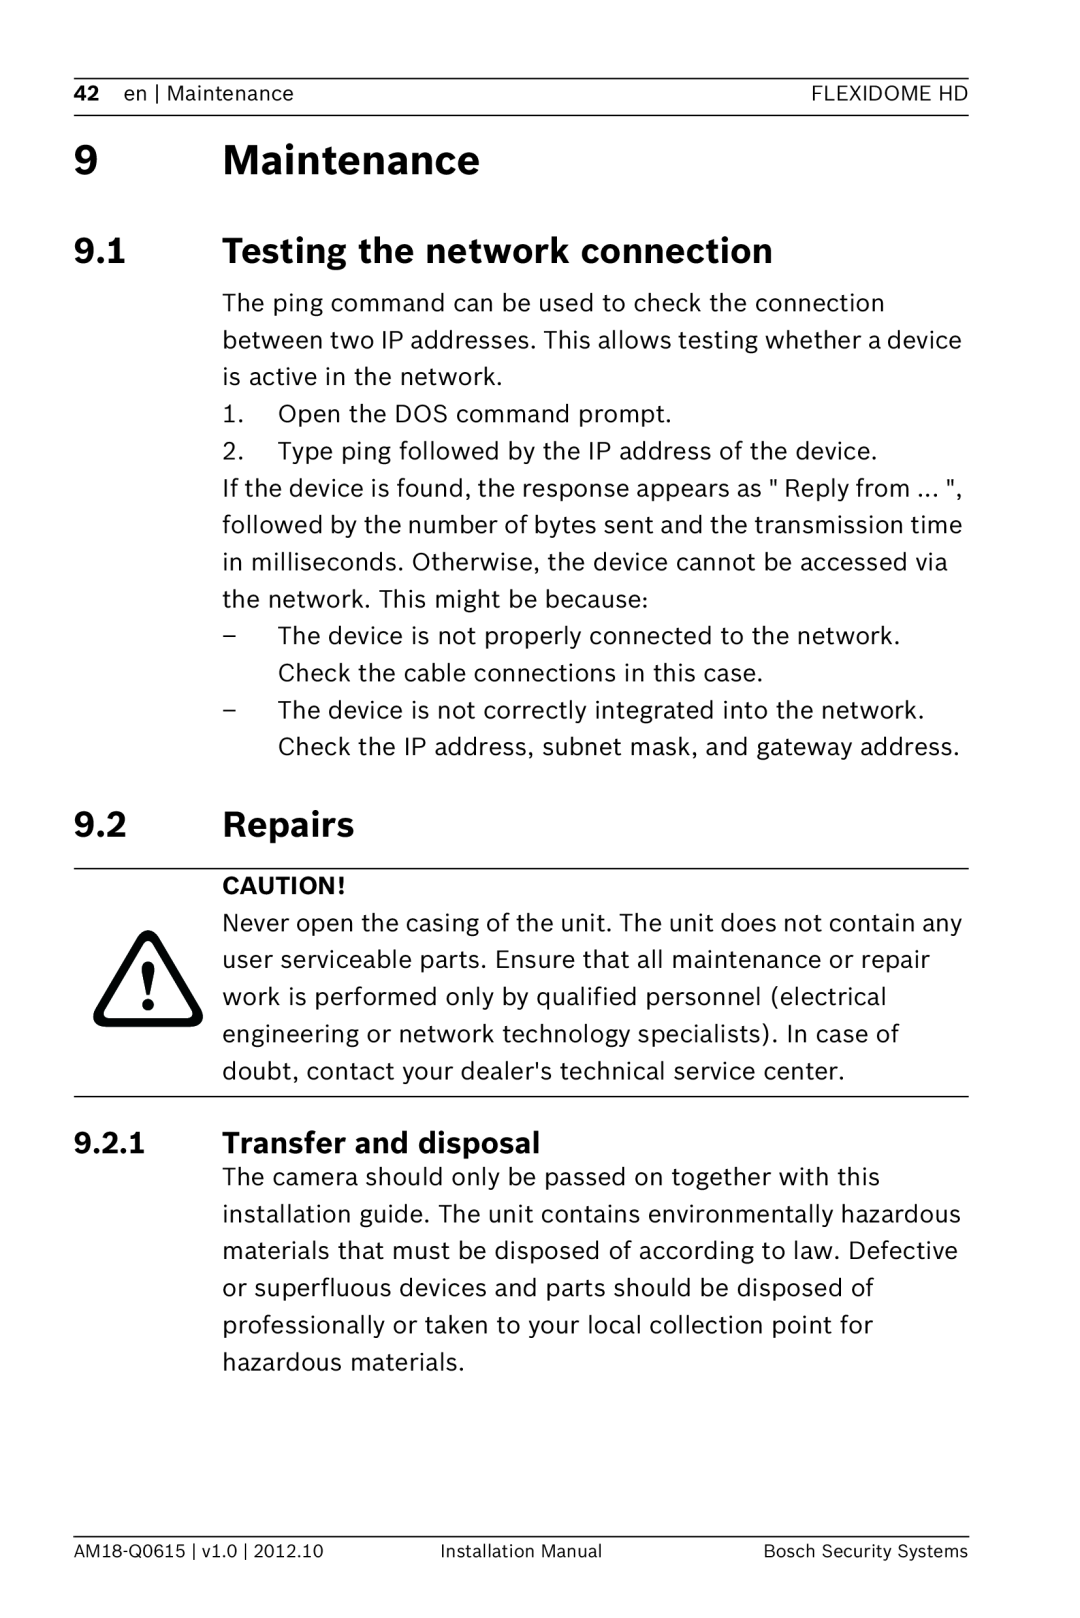 Bosch Appliances NDN-733 9Maintenance, 9.1Testing the network connection, 9.2Repairs, 9.2.1Transfer and disposal 